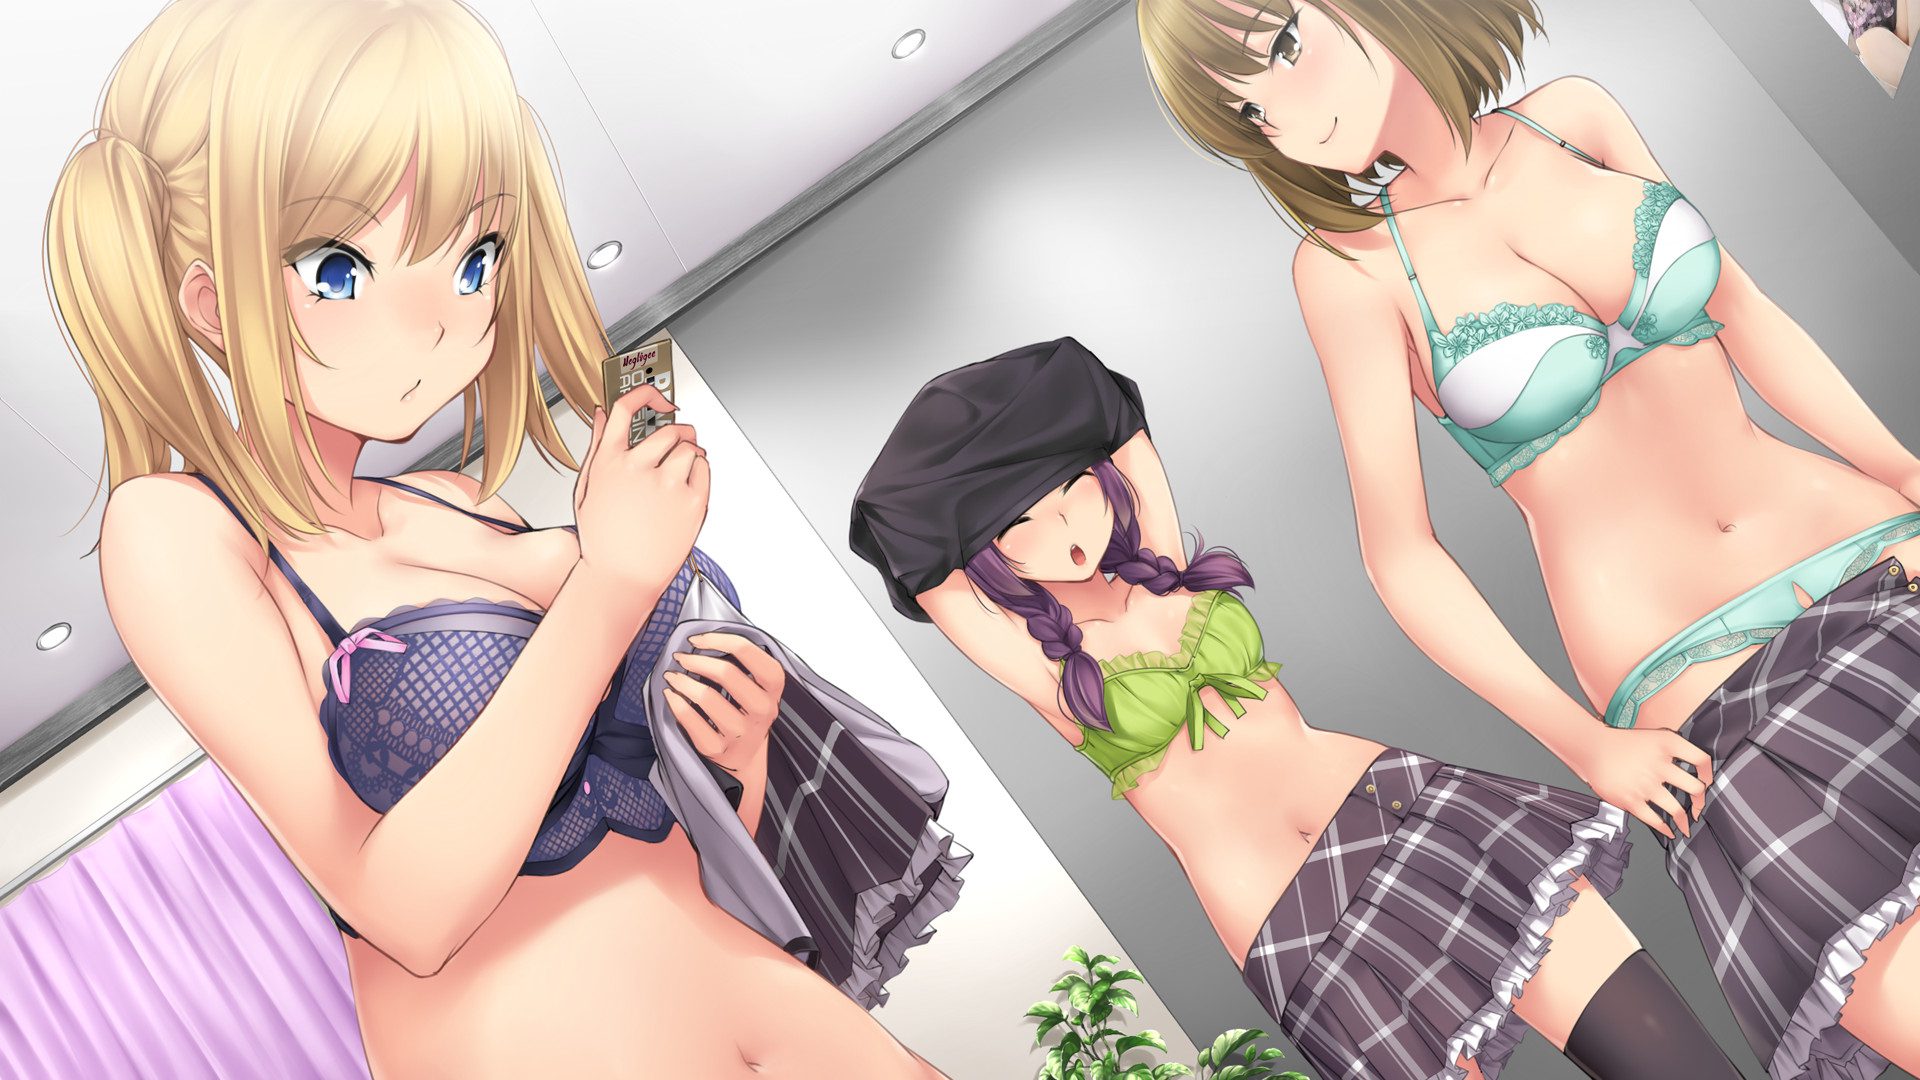 Steam To Allow Hawt, Uncensored Hentai On Its Platform